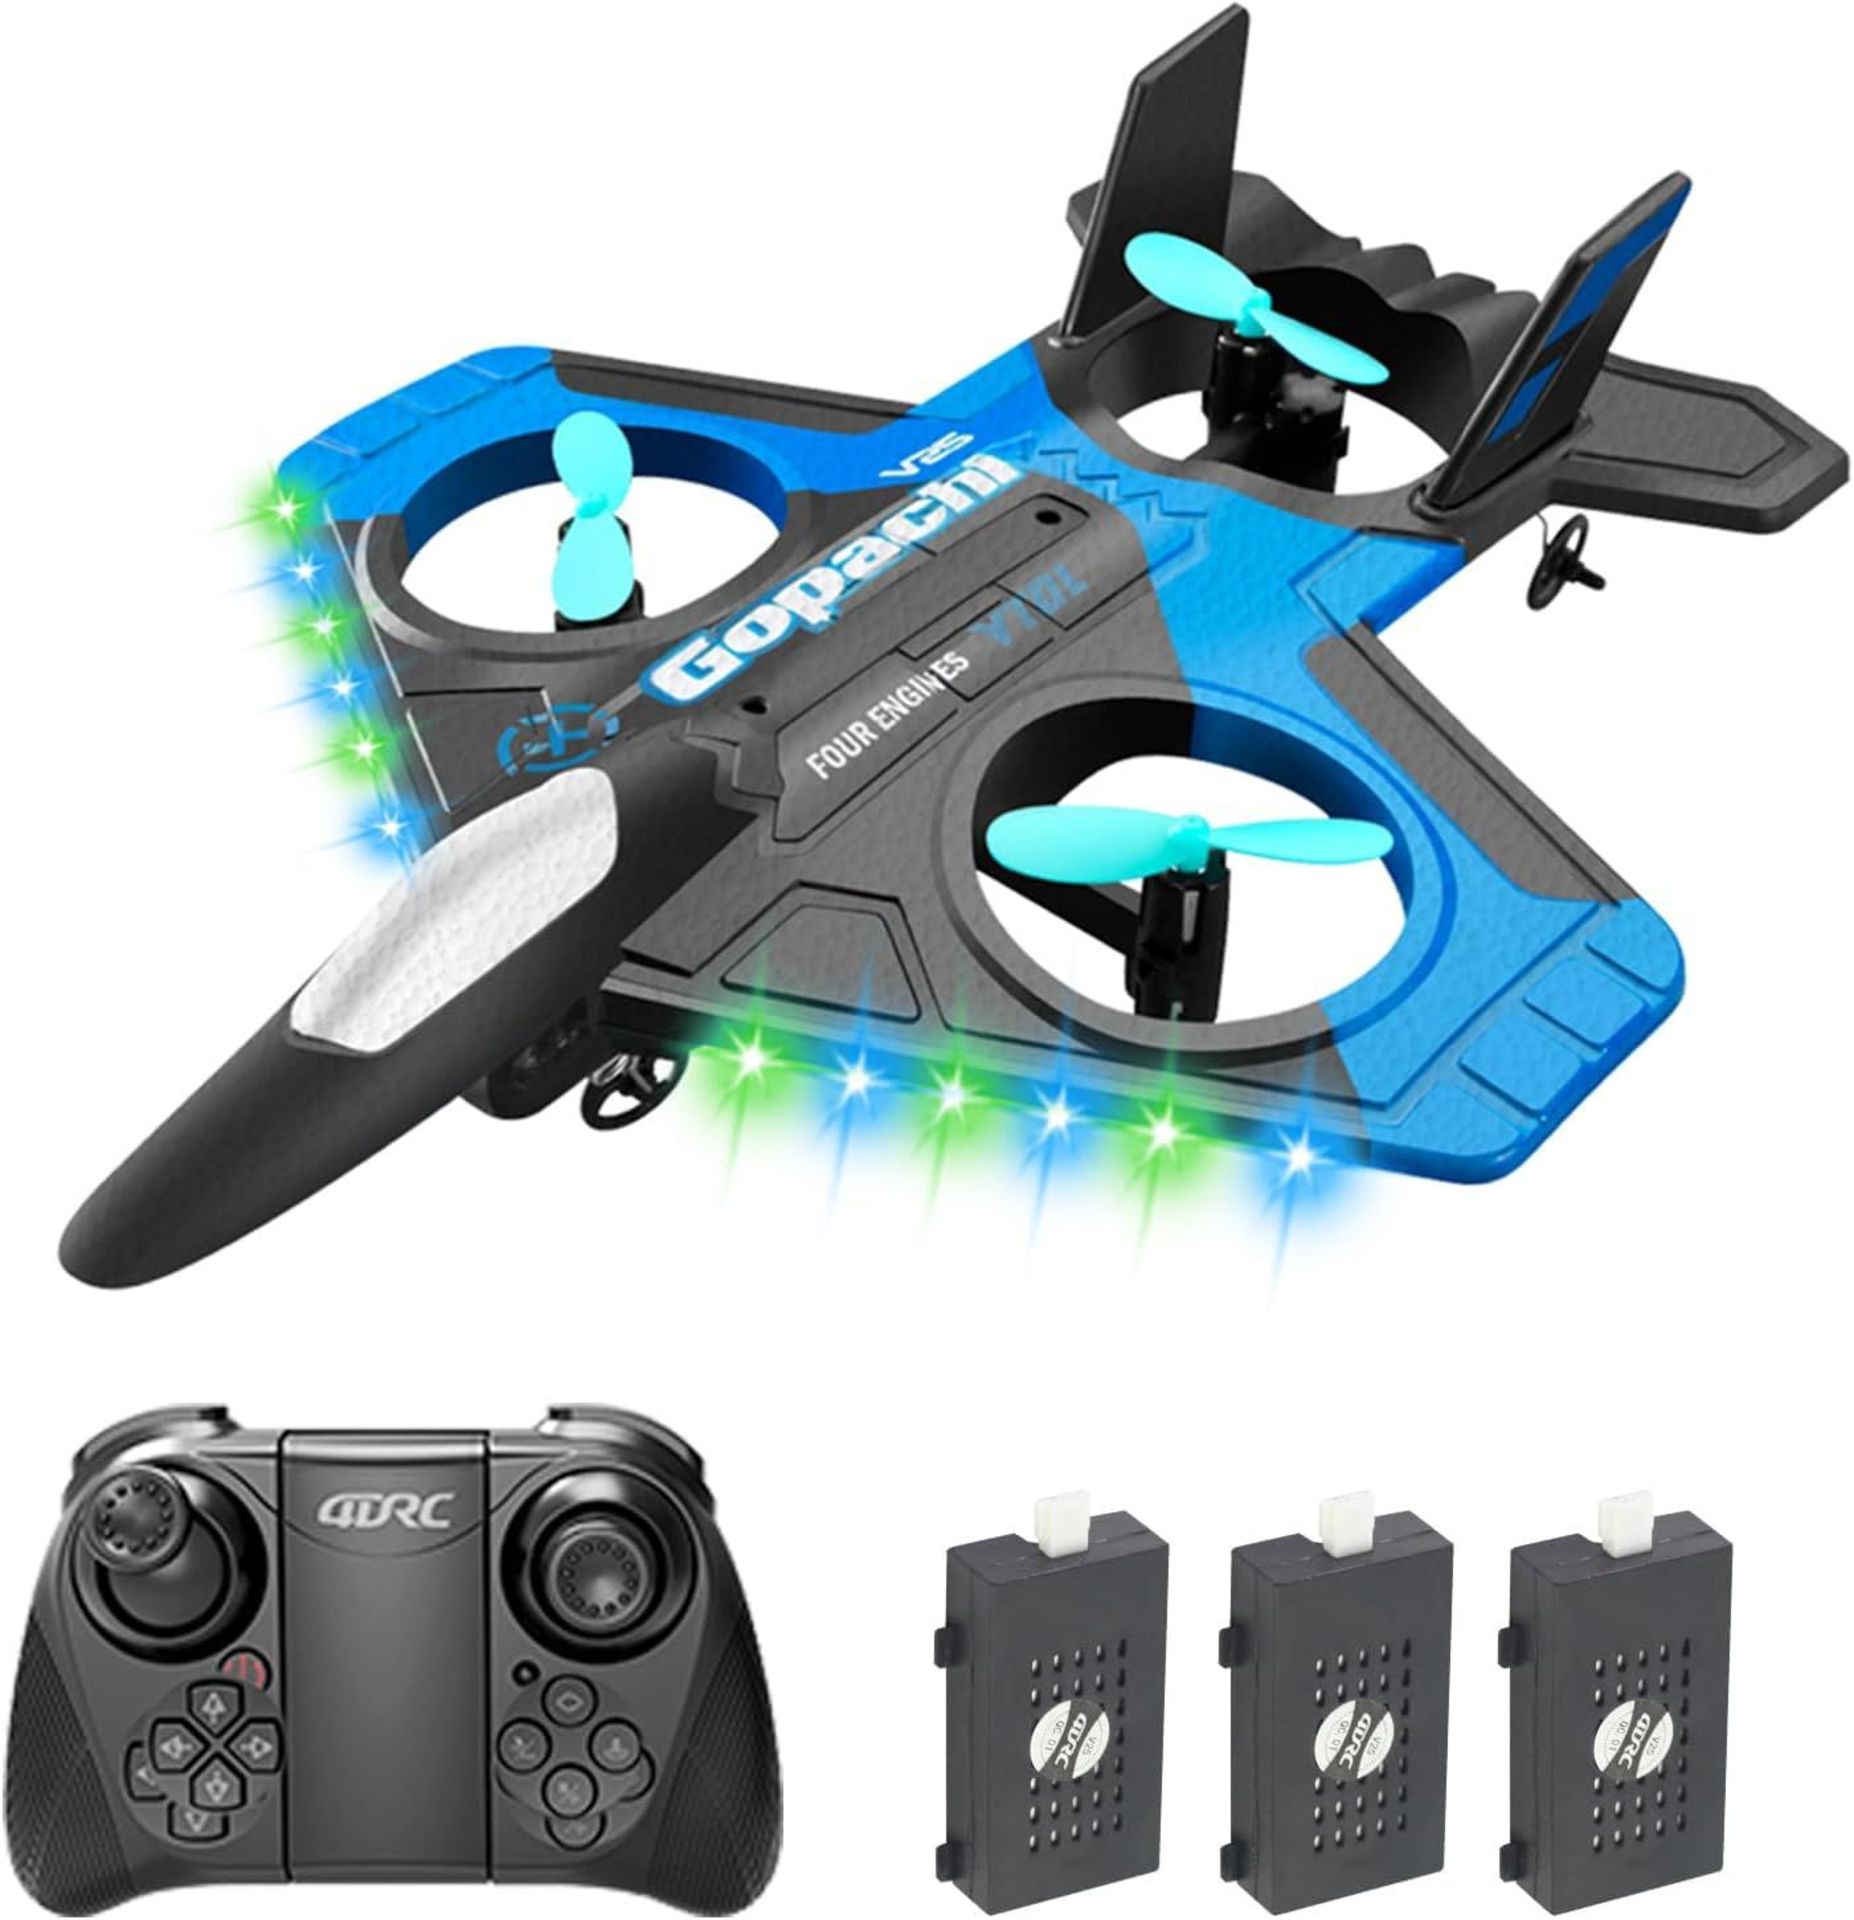 4DRC V25 RC Airplane, Drone for Kids and Beginners RC Plane with Light, Remote Control Airplane